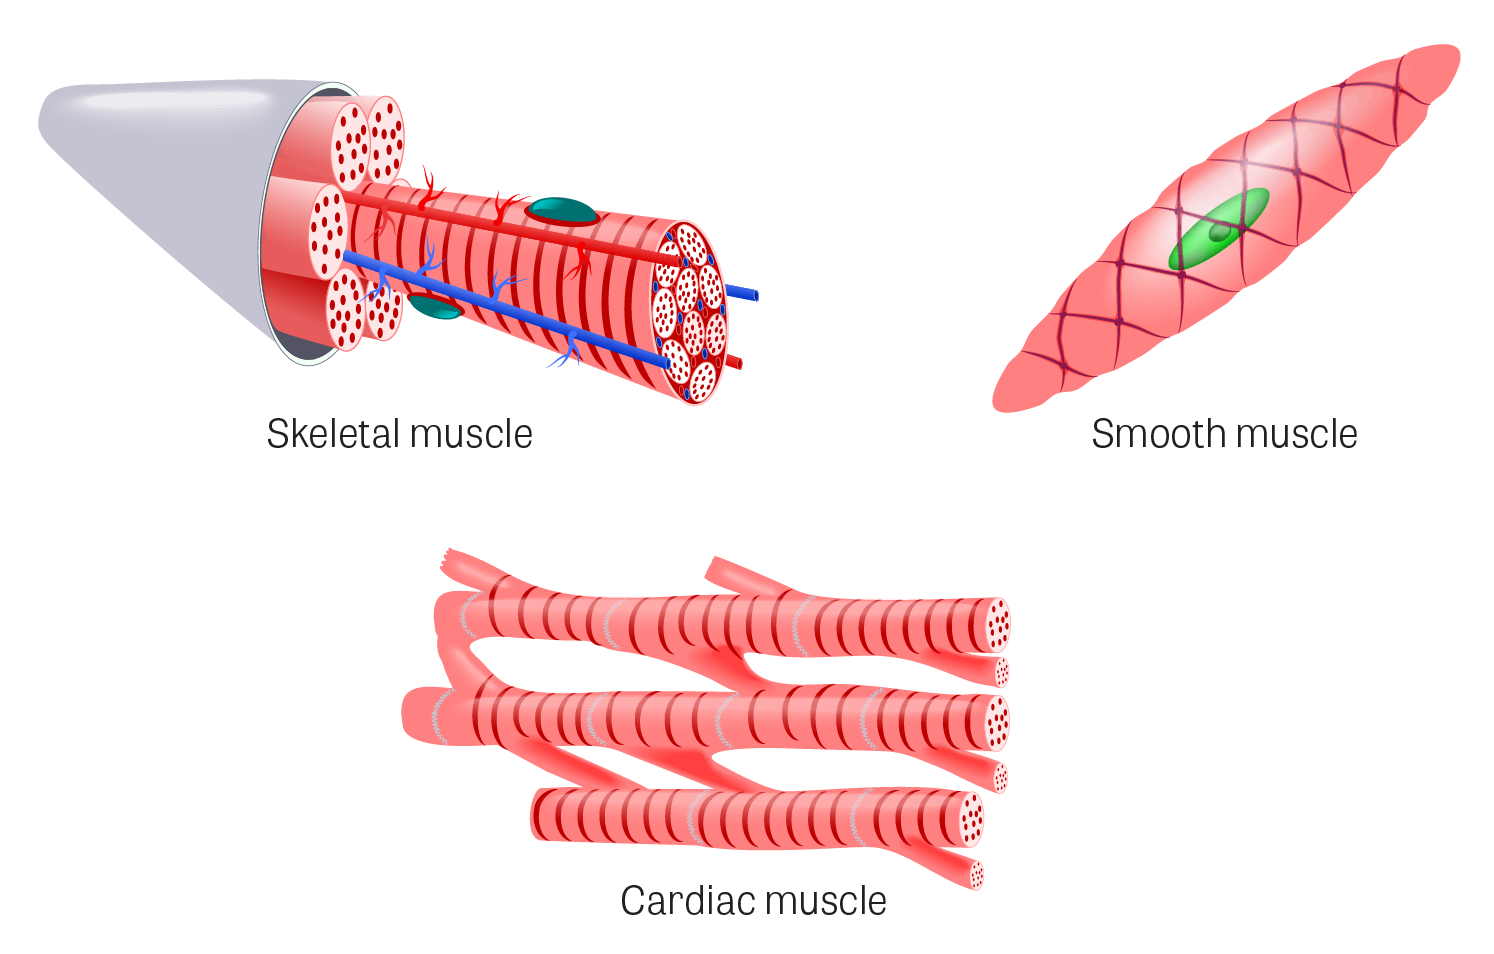 Muscles clipart body tissue. Toxtutor tissues illustration of